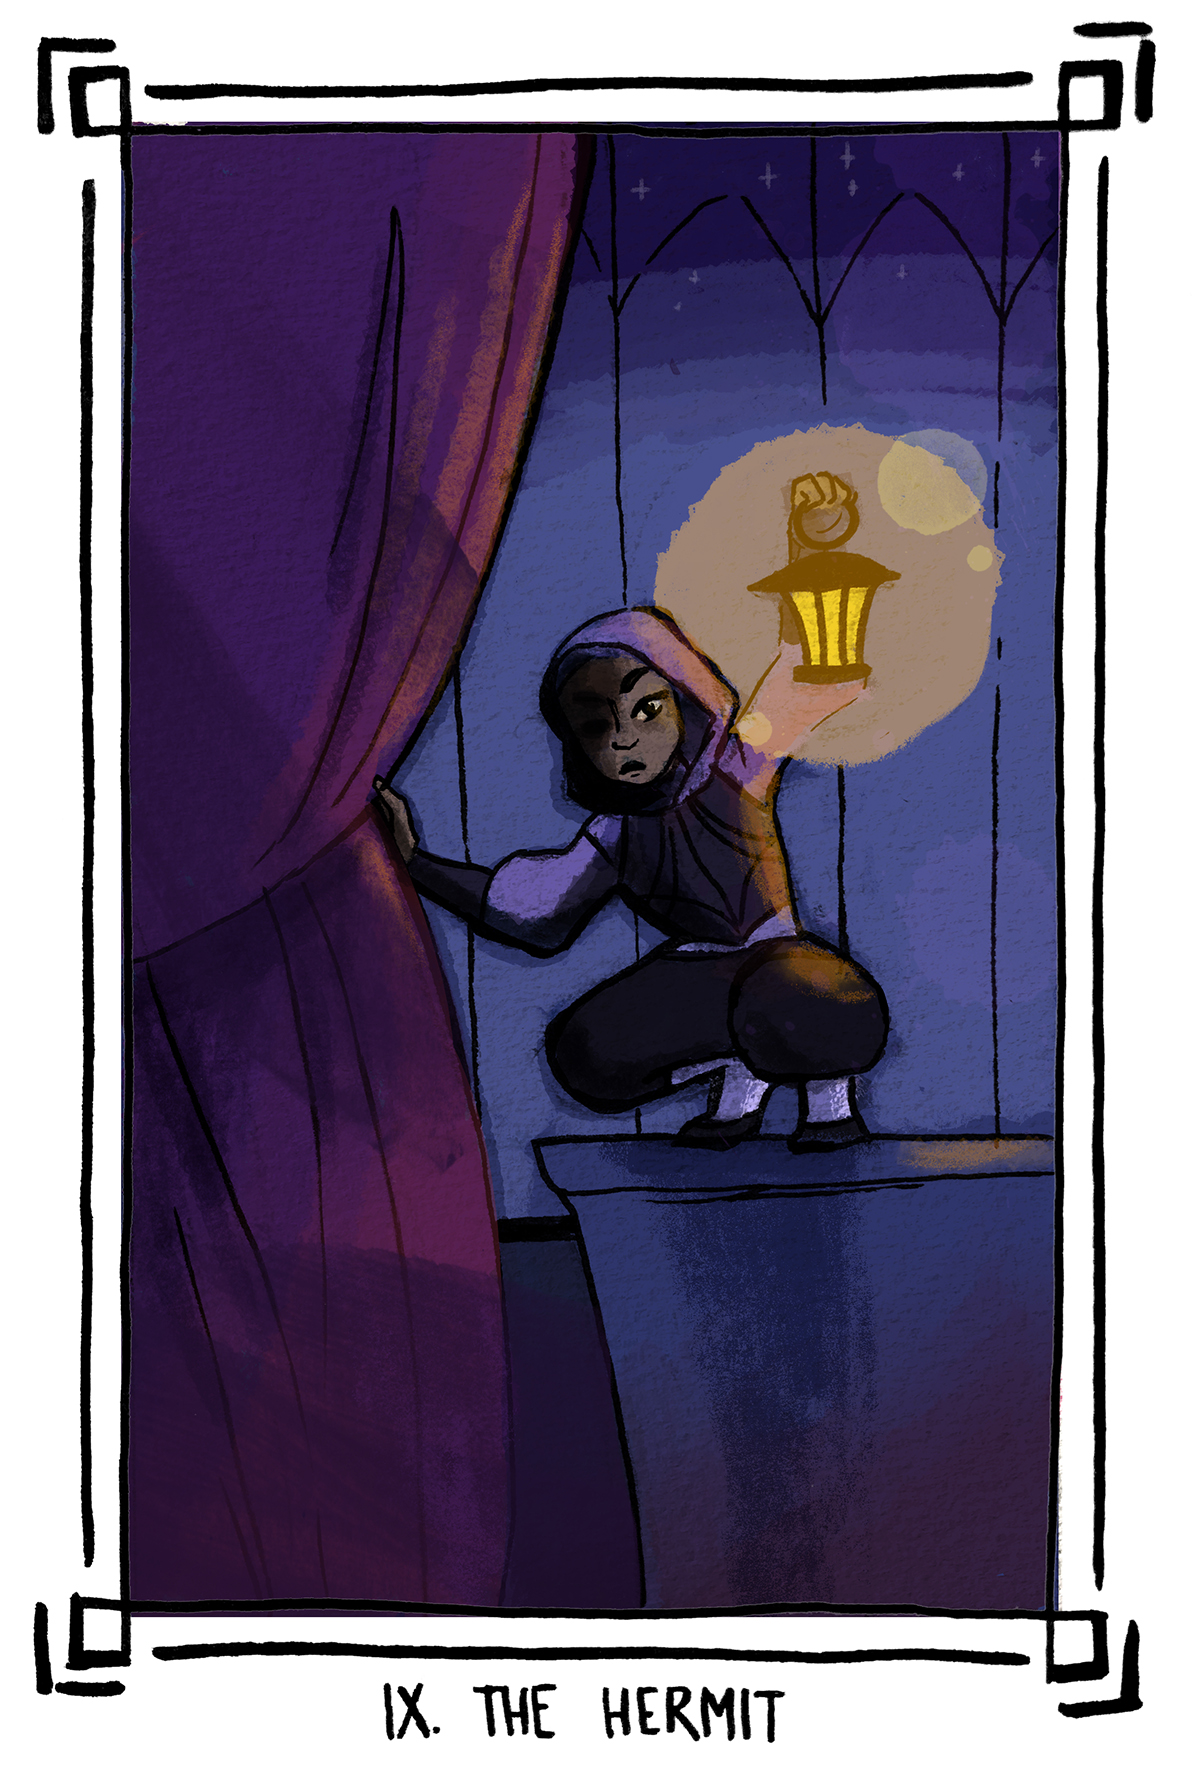 Illustration of a tarot card of the Hermit, girl crouching pulling back a curtain holding glowing lantern, white border around image